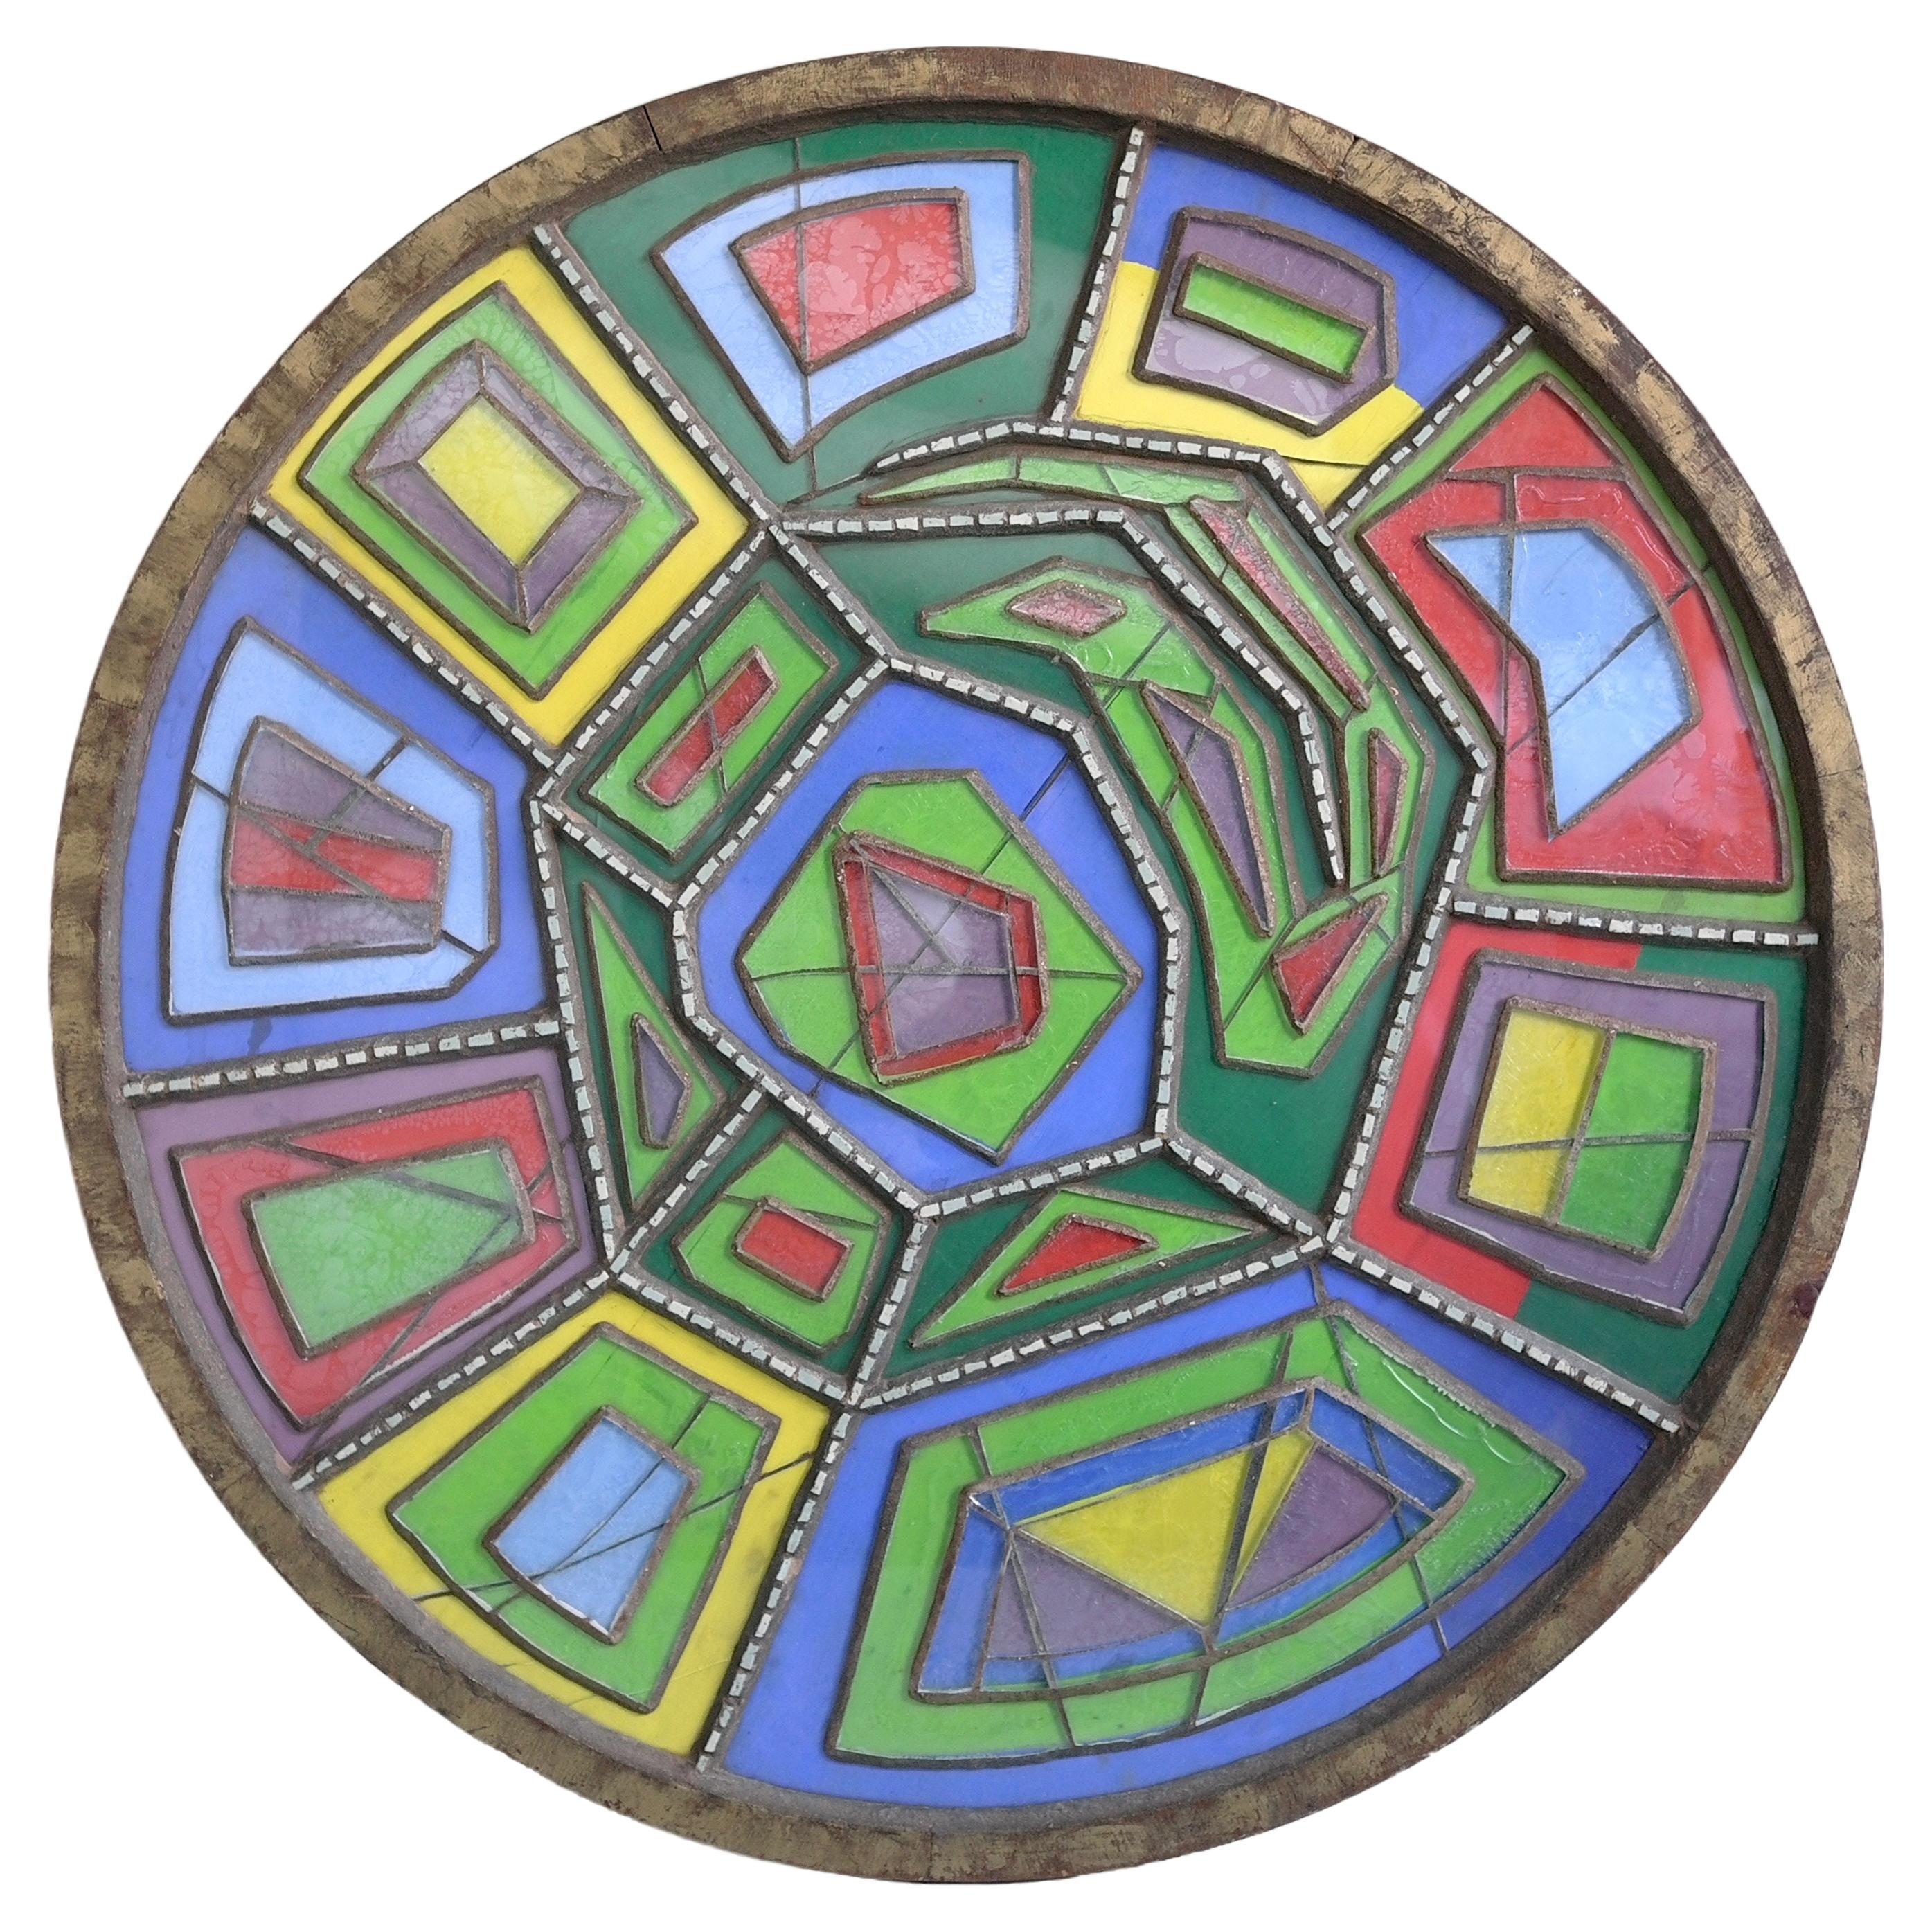 Large Midcentury Multicolored Round Glass and Concrete Wall Sculpture, 1950s For Sale